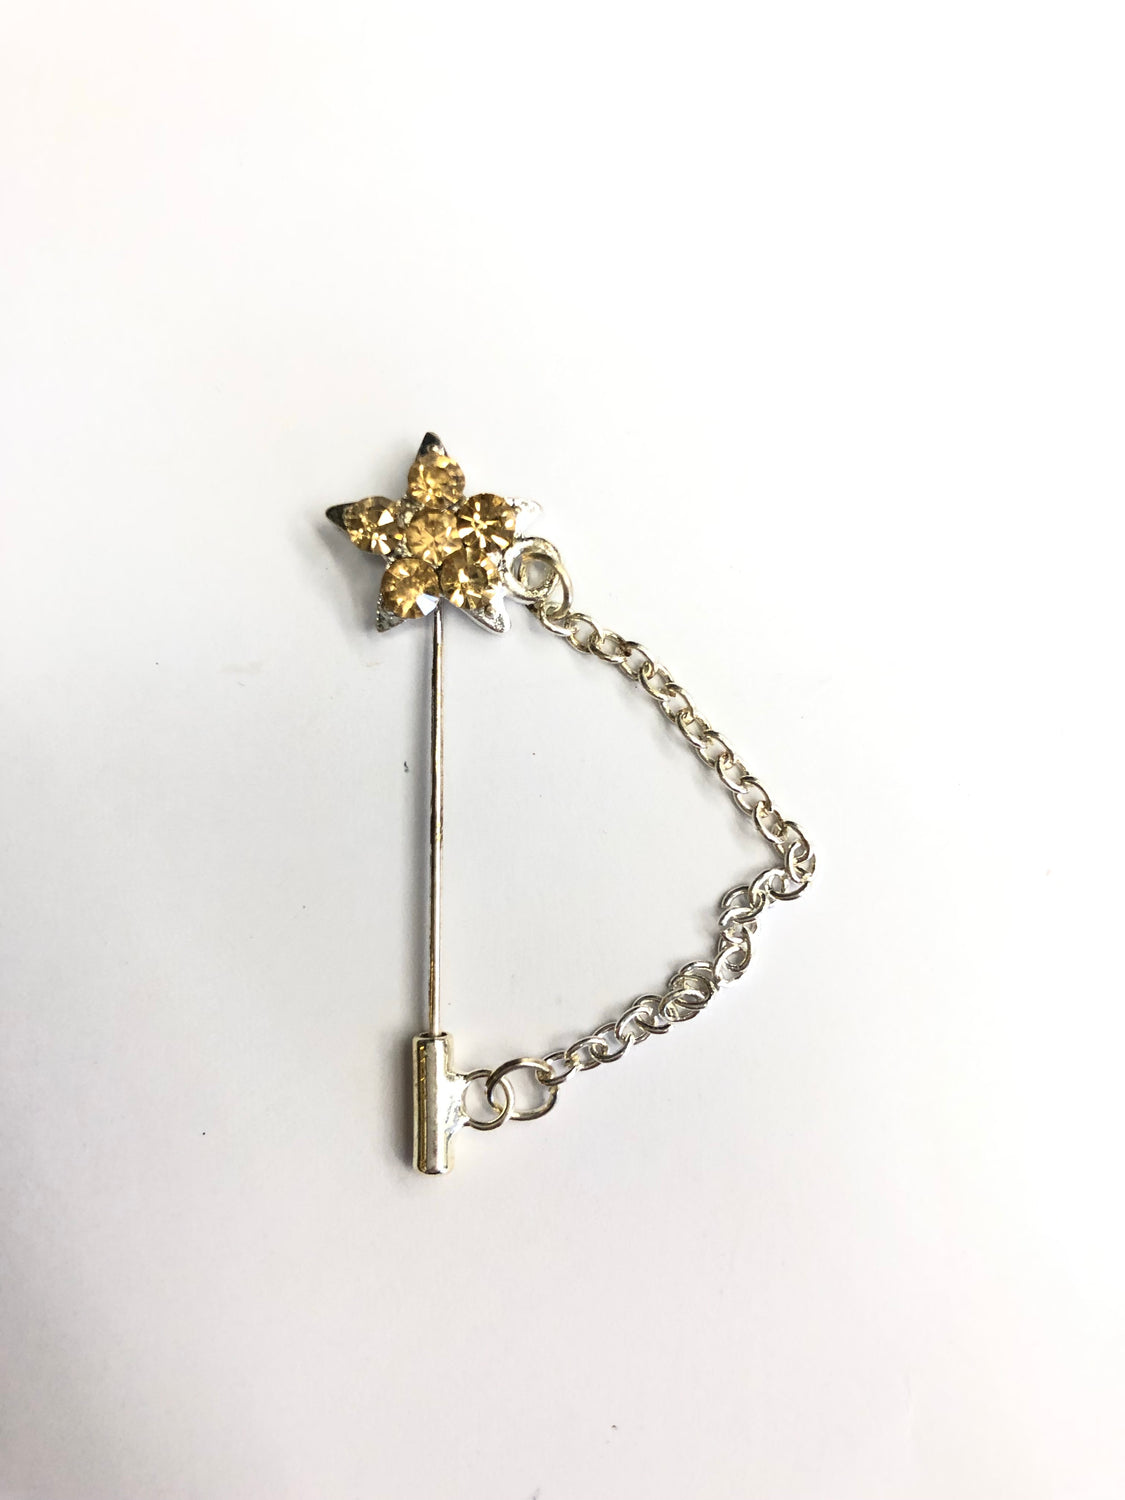 silver clasp pin with gold star jewel and a chain